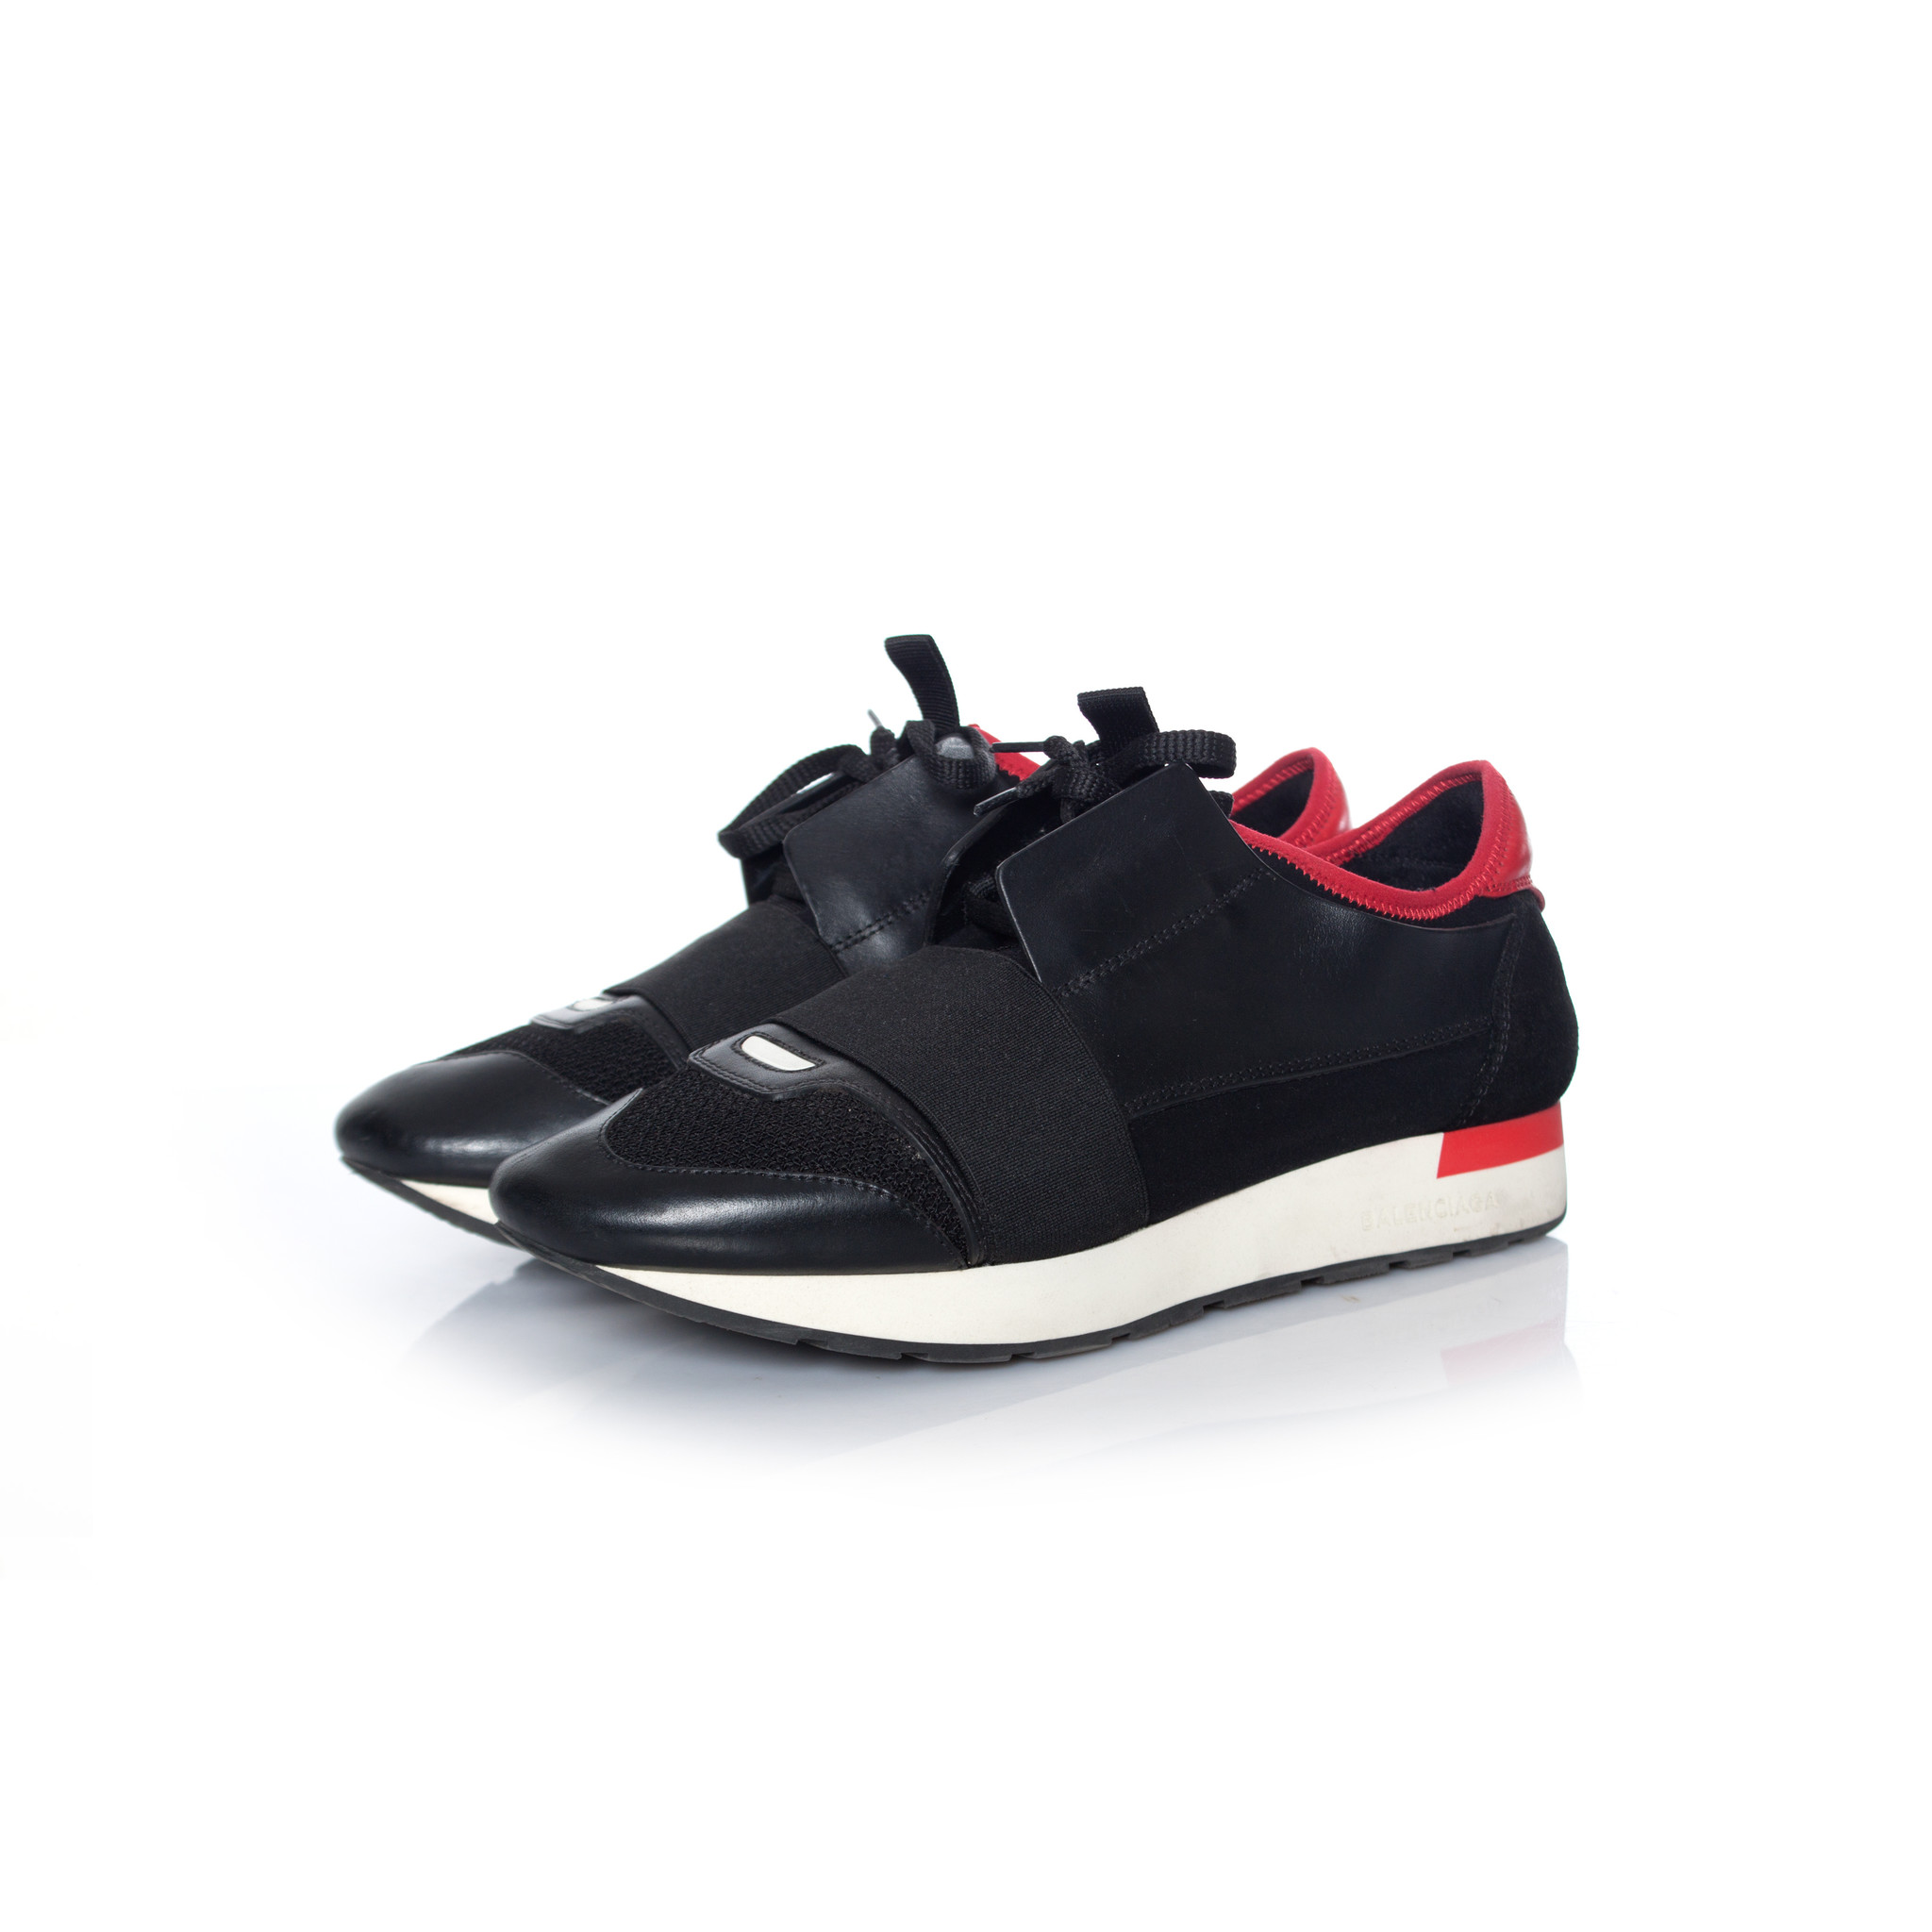 black and red balenciaga race runners